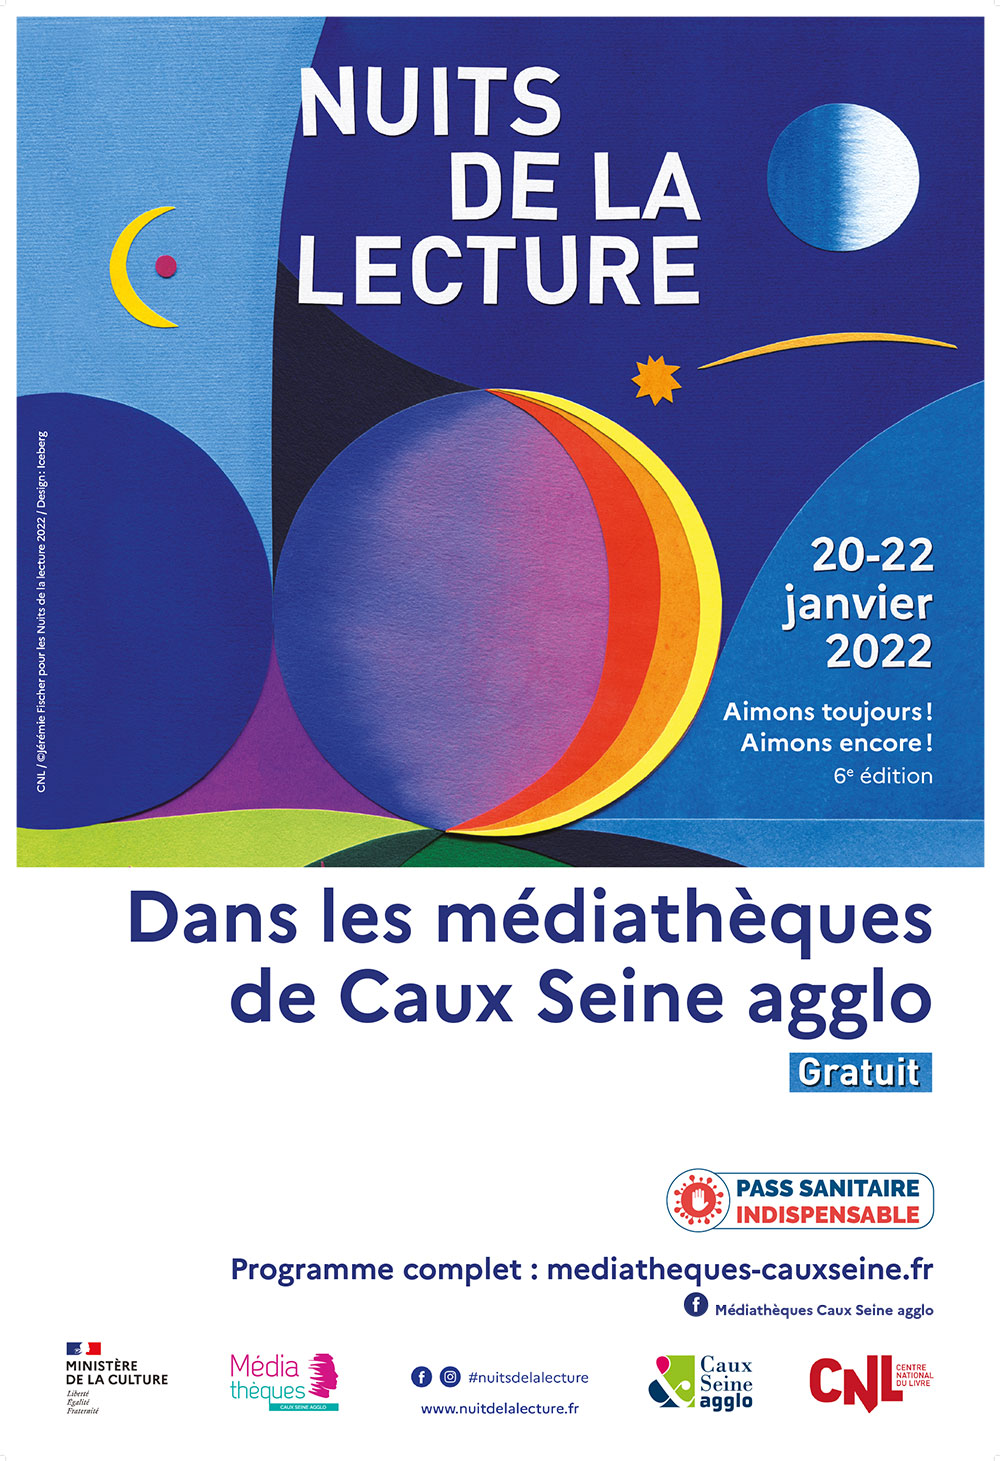 MED-nuits-lecture-2022-aff